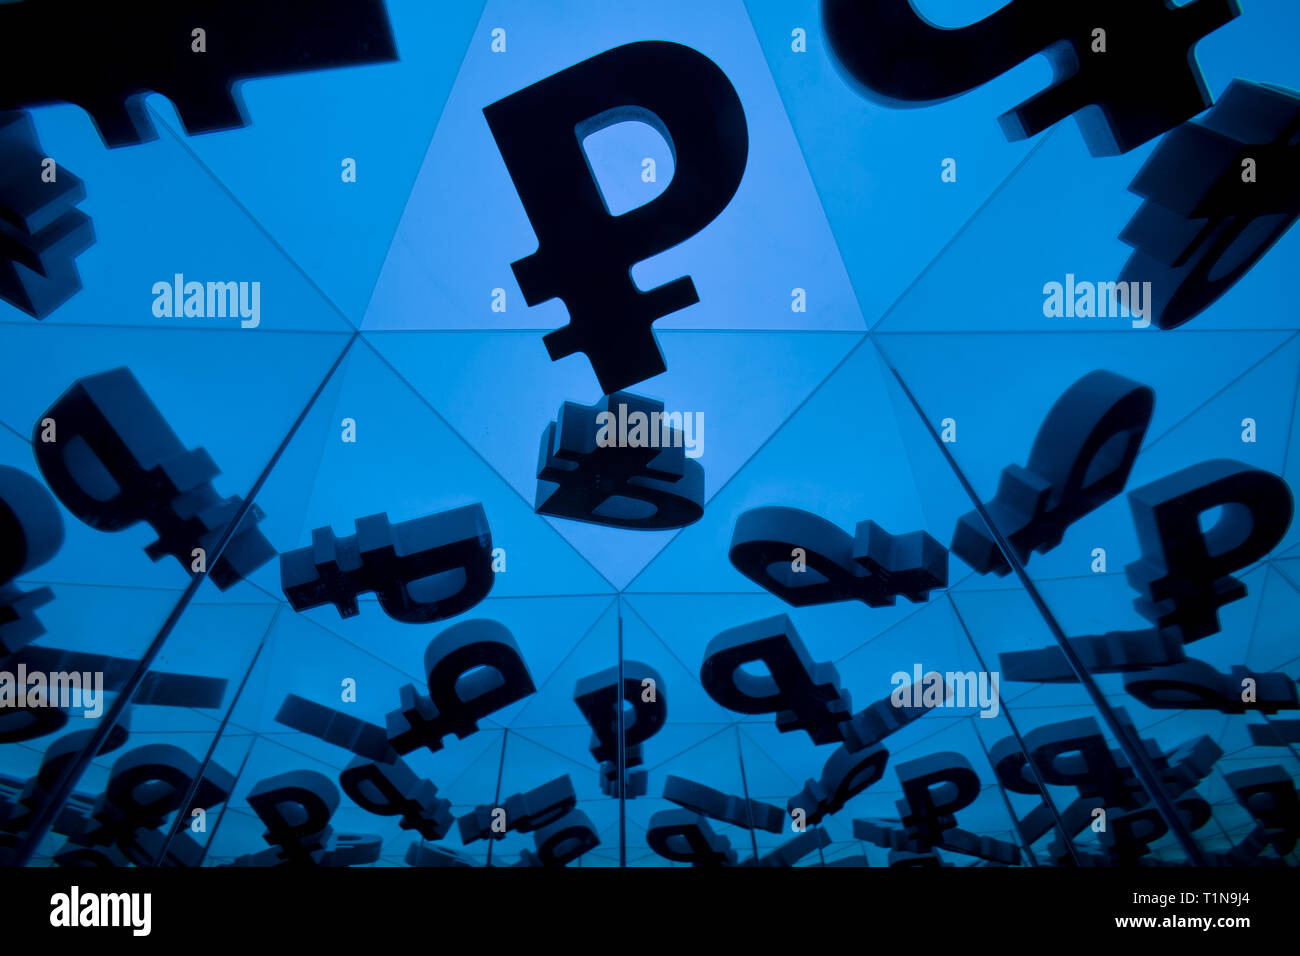 Russian Ruble Currency Symbol With Many Mirroring Images of Itself on Blue Background Stock Photo